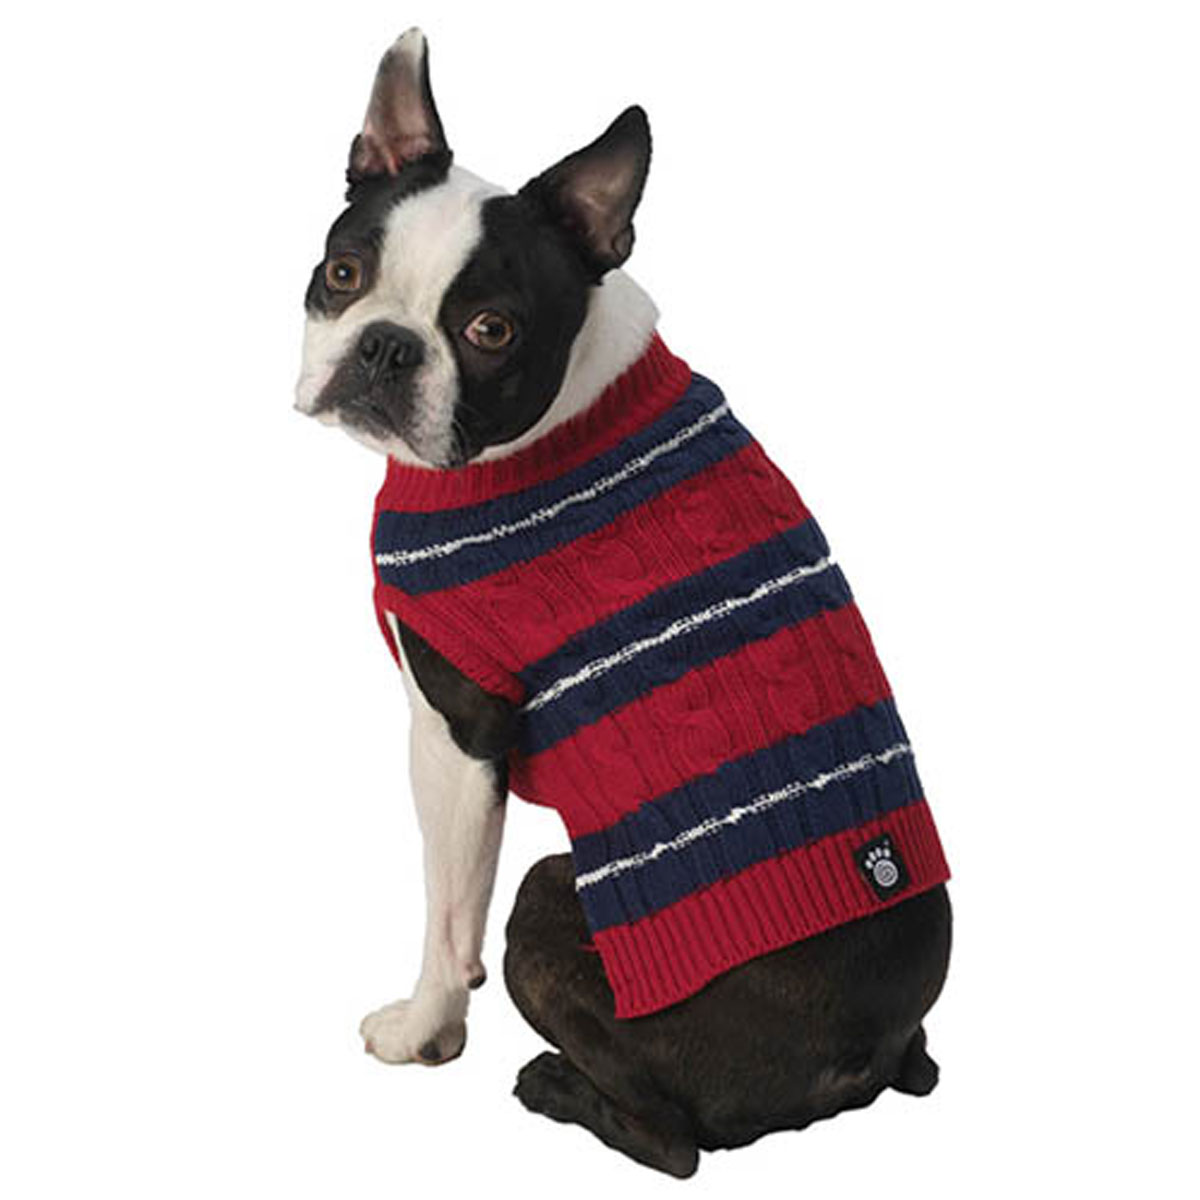 Ziggy's Striped Dog Sweater - Red/Navy at BaxterBoo